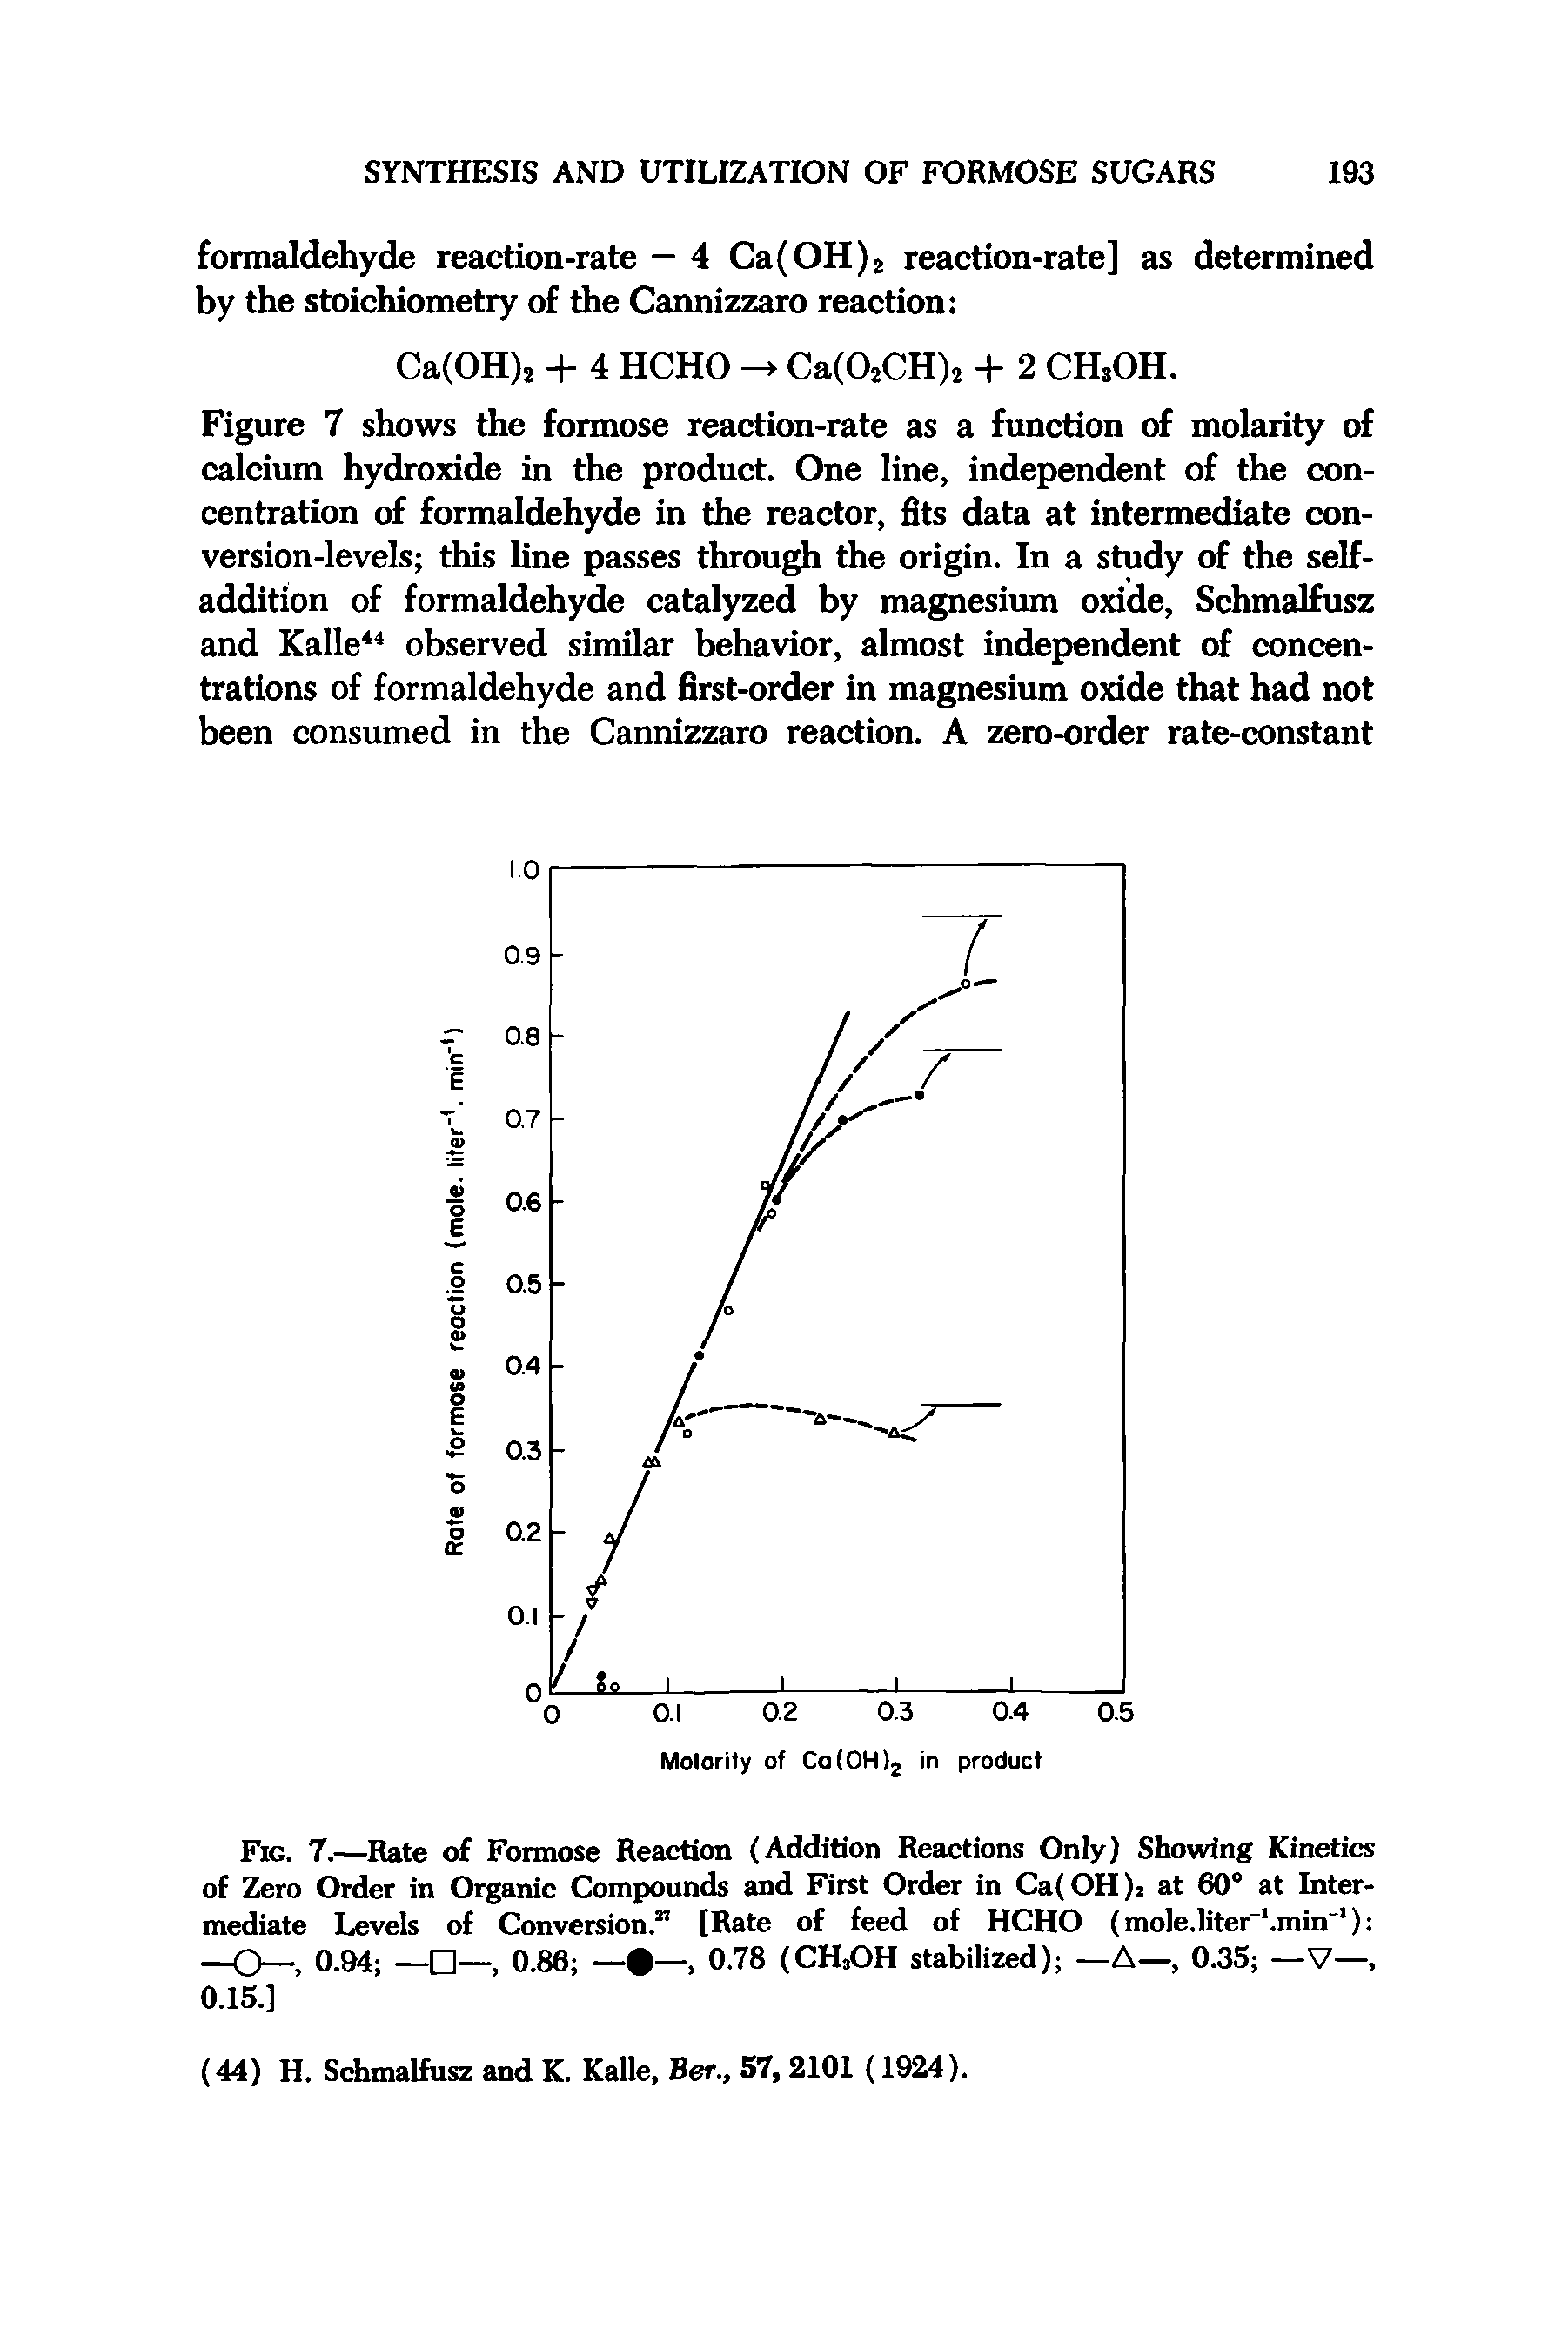 Fig. 7.—Rate of Formose Reaction (Addition Reactions Only) Showing Kinetics of Zero Order in Organic Compounds and First Order in Ca(OH)2 at 60° at Intermediate Levels of Conversion. [Rate of feed of HCHO (mole.liter" .min ) 0—, 0.94 —0.86 —, 0.78 (CHjOH stabilized) —A—, 0.35 —V—, 0.15.]...